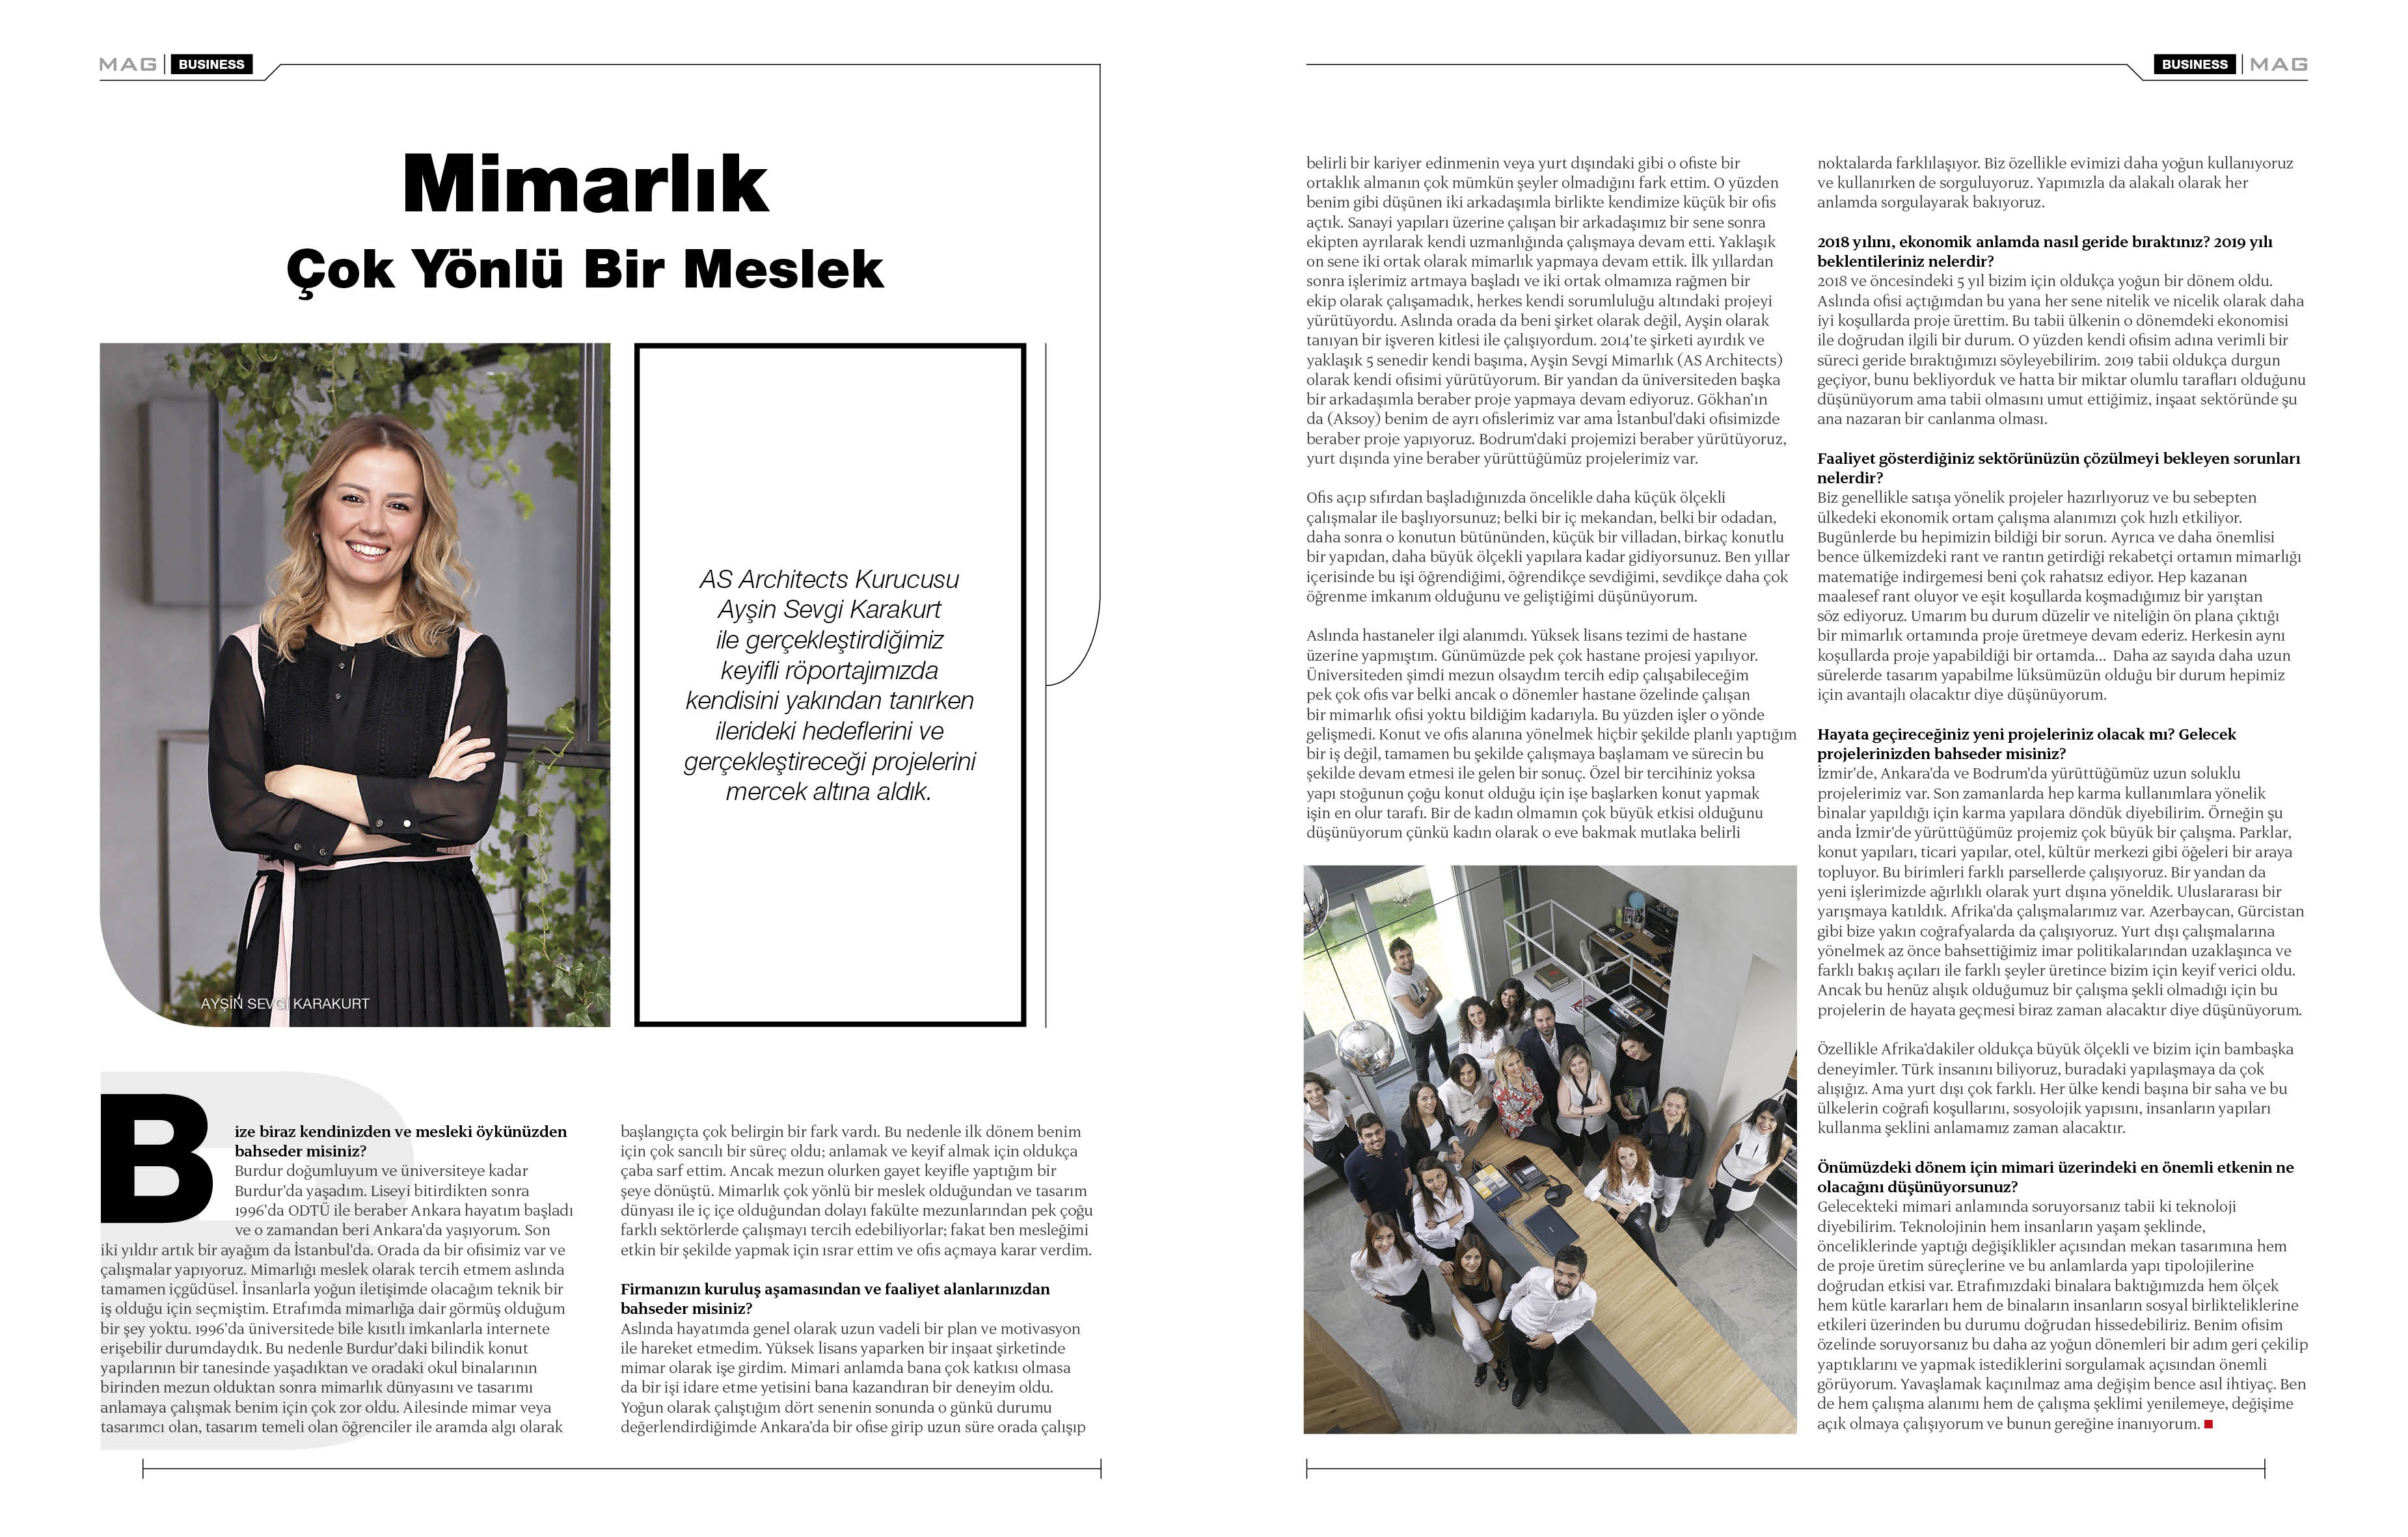  MAG BUSINESS, 2019 SPRING-SUMMER / INTERVIEW 